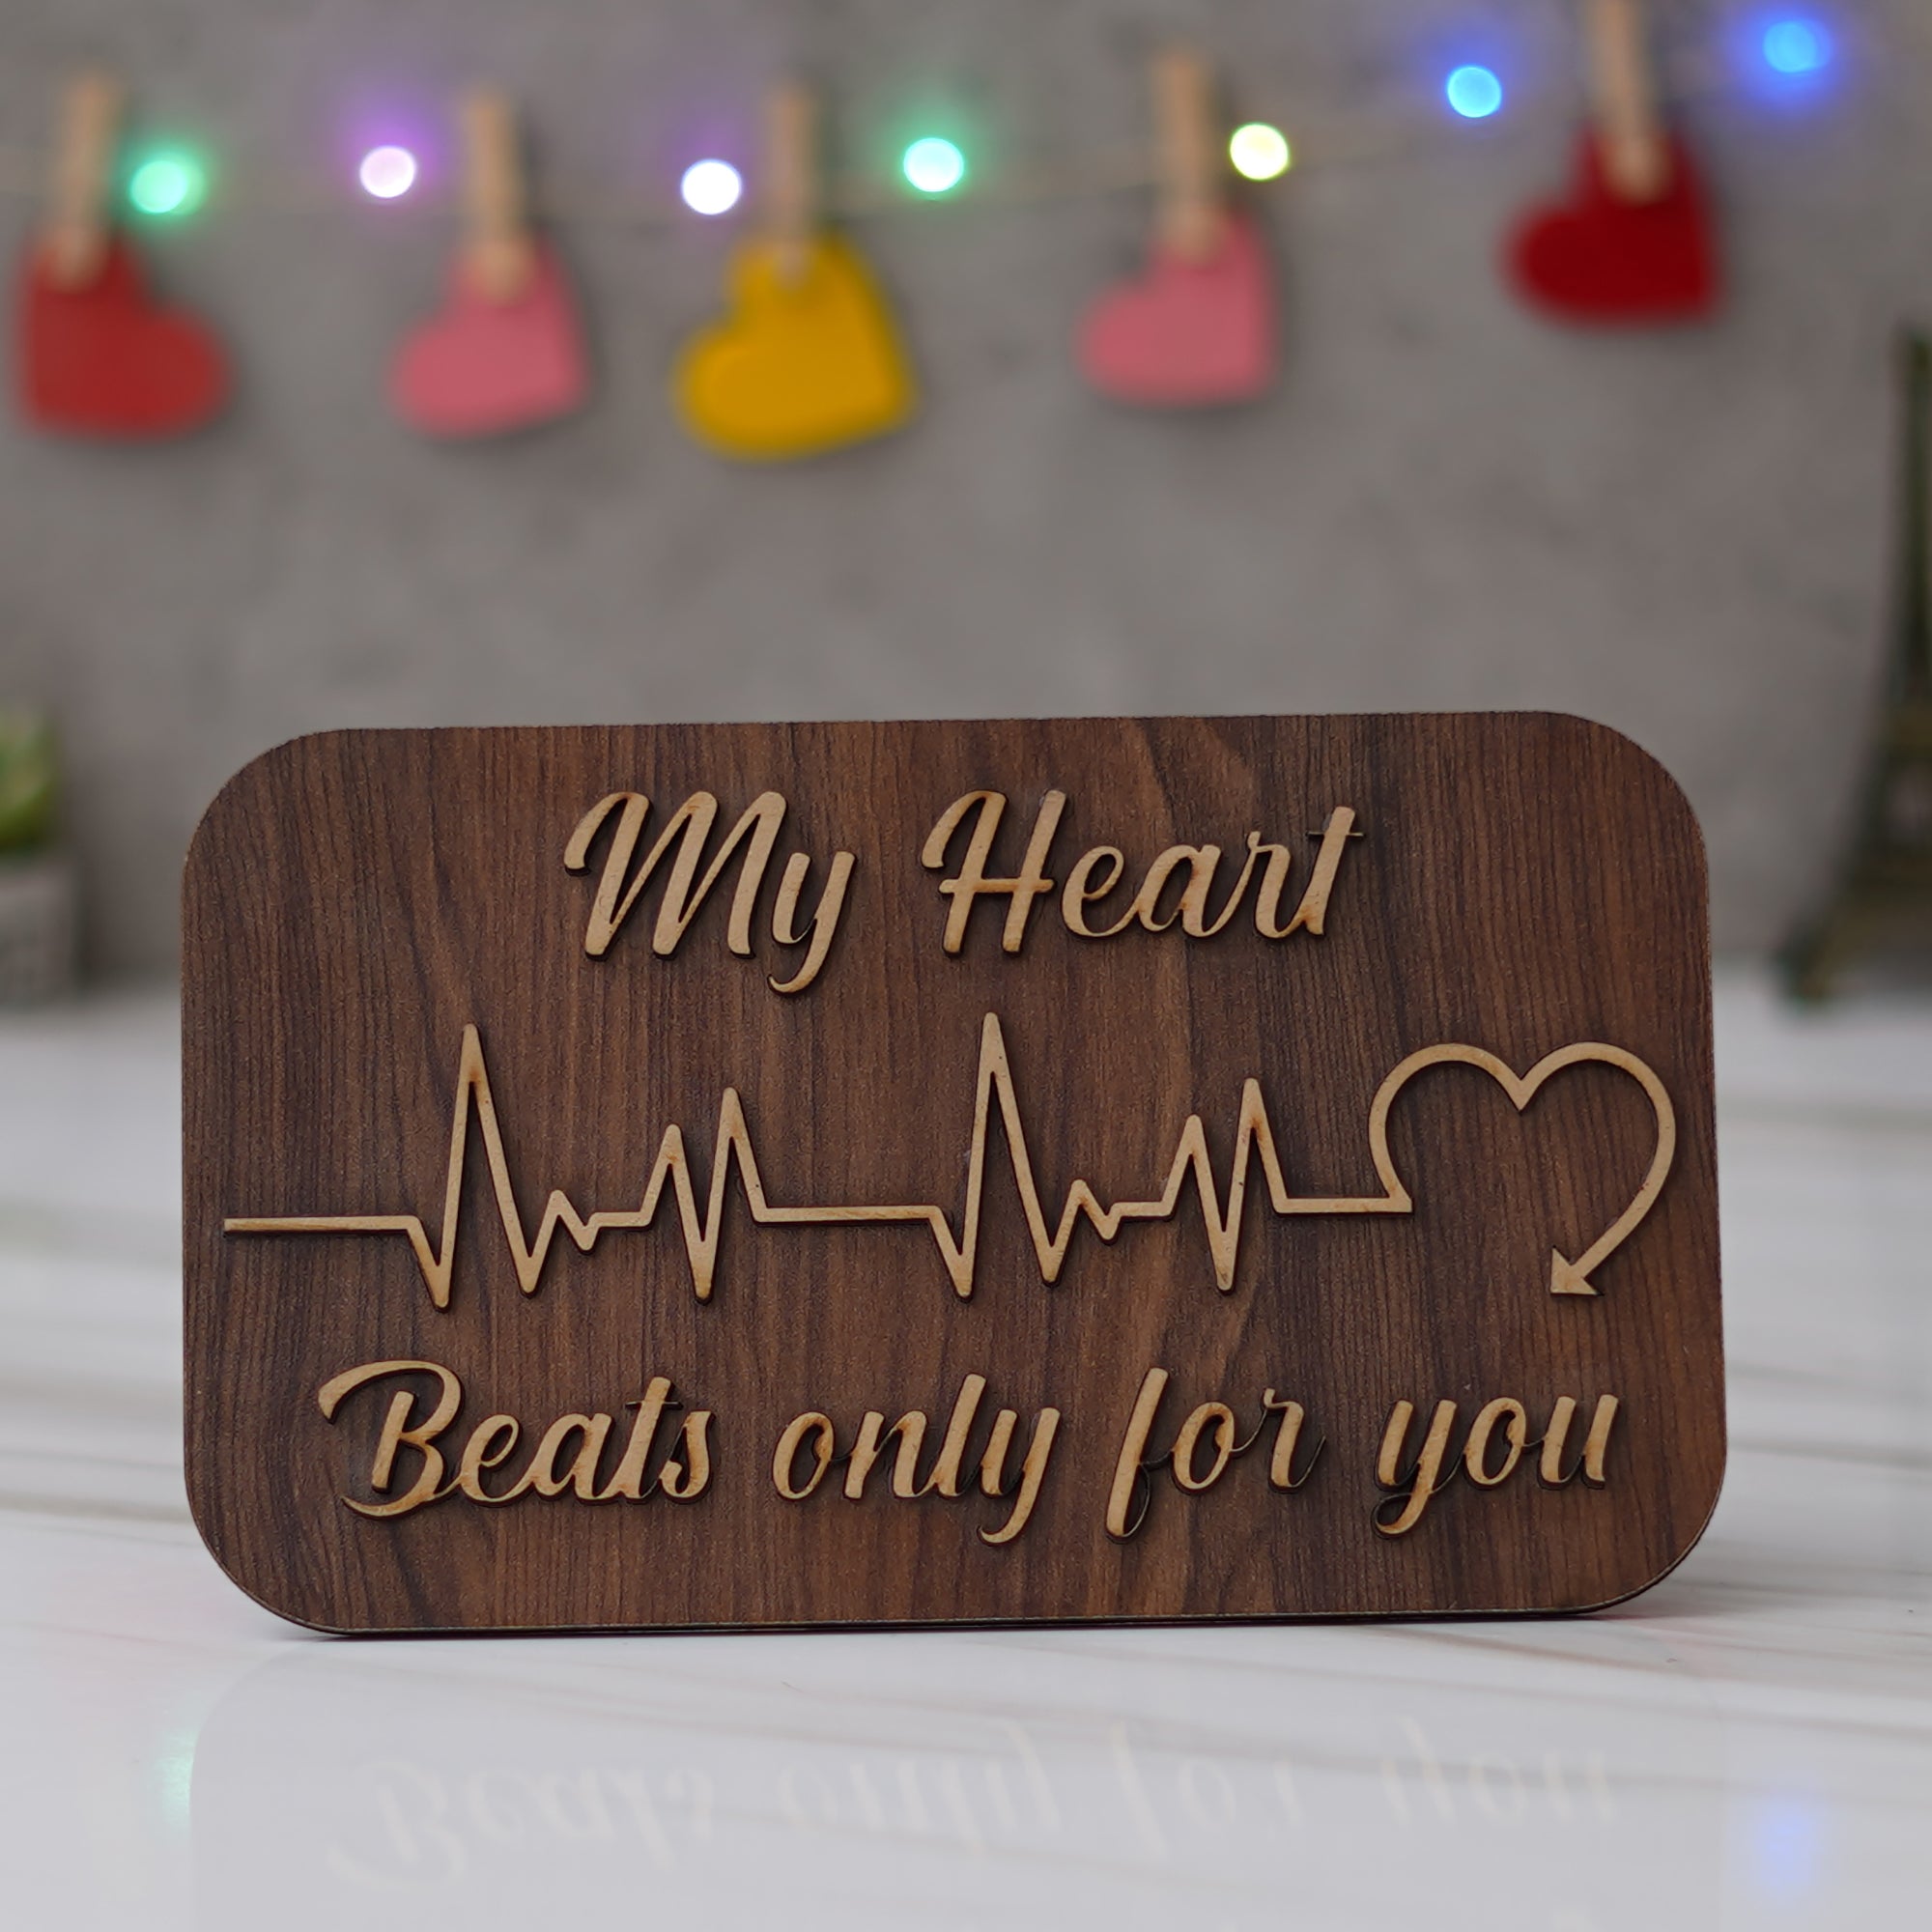 Valentine Combo of Pack of 8 Love Gift Cards, "My Heart Beats Only For You" Wooden Showpiece With Stand, Pink Heart Shaped Gift Box with Teddy and Roses 3